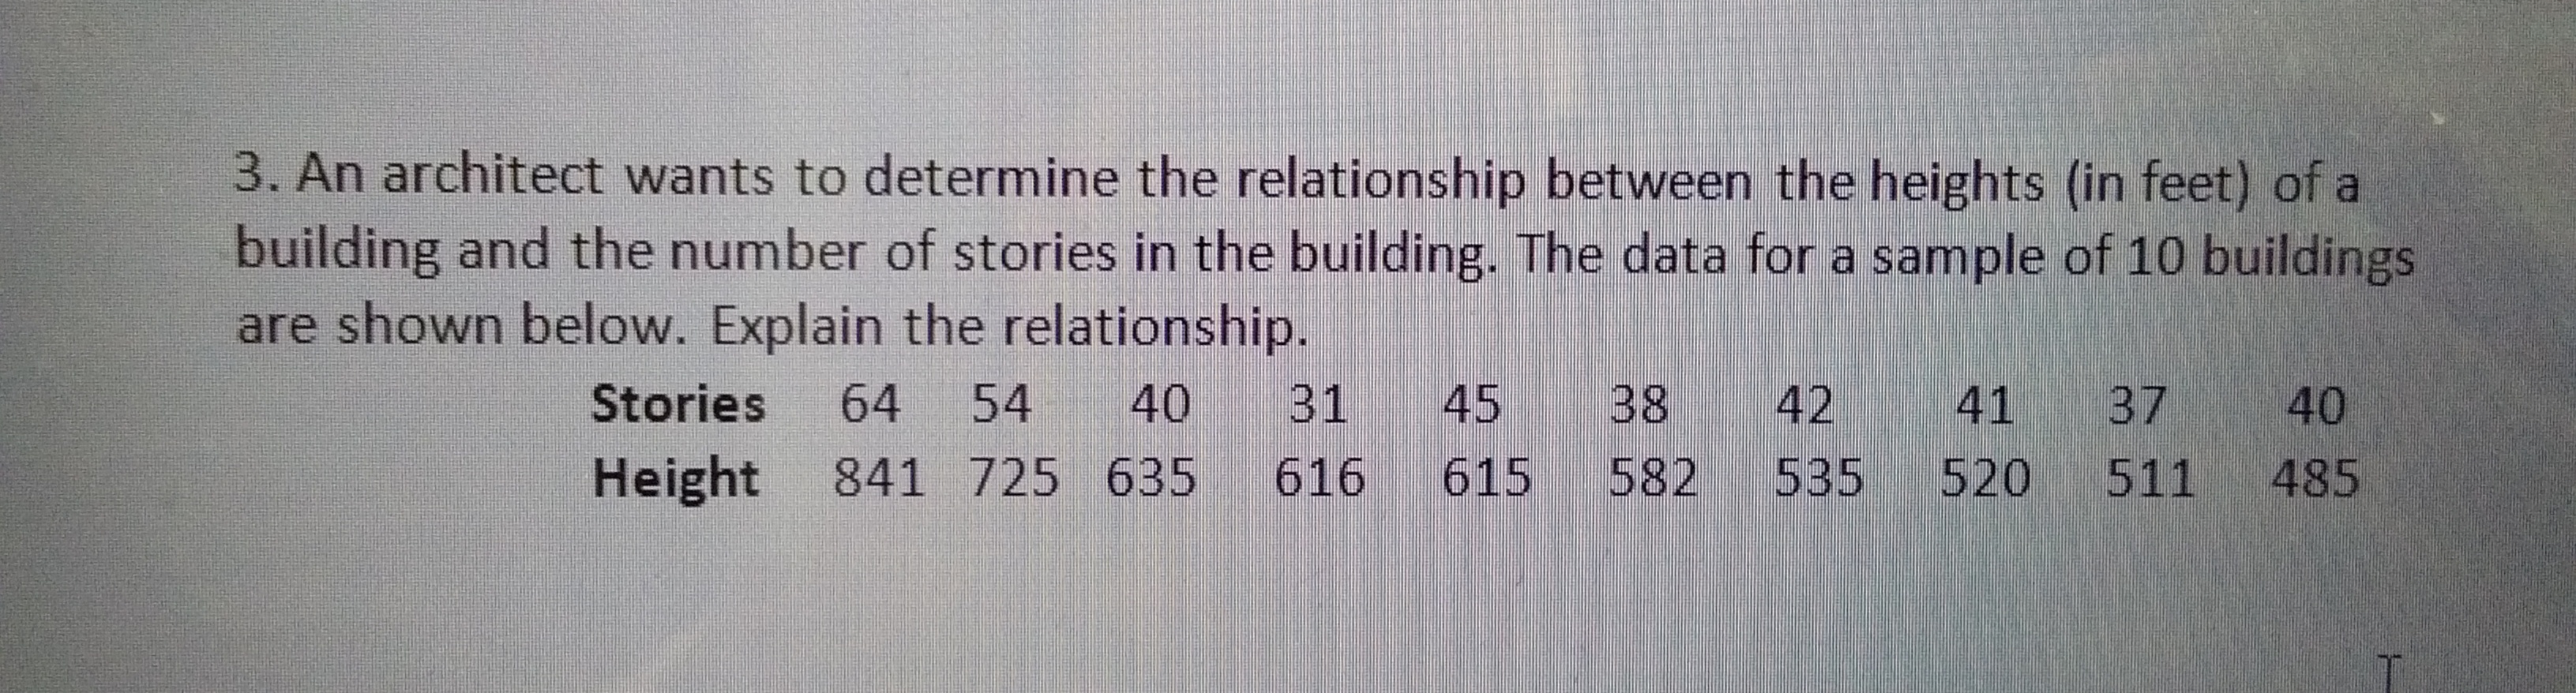 3. An architect wants to determine the relationship between the heights (in feet) of a
building and the number of stories in the building. The data for a sample of 10 buildings
are shown below. Explain the relationship.
Stories
64
54
40
31
45
38
42
41 37
40
Height
841 725 635
616
615
582
535
520
511
485
